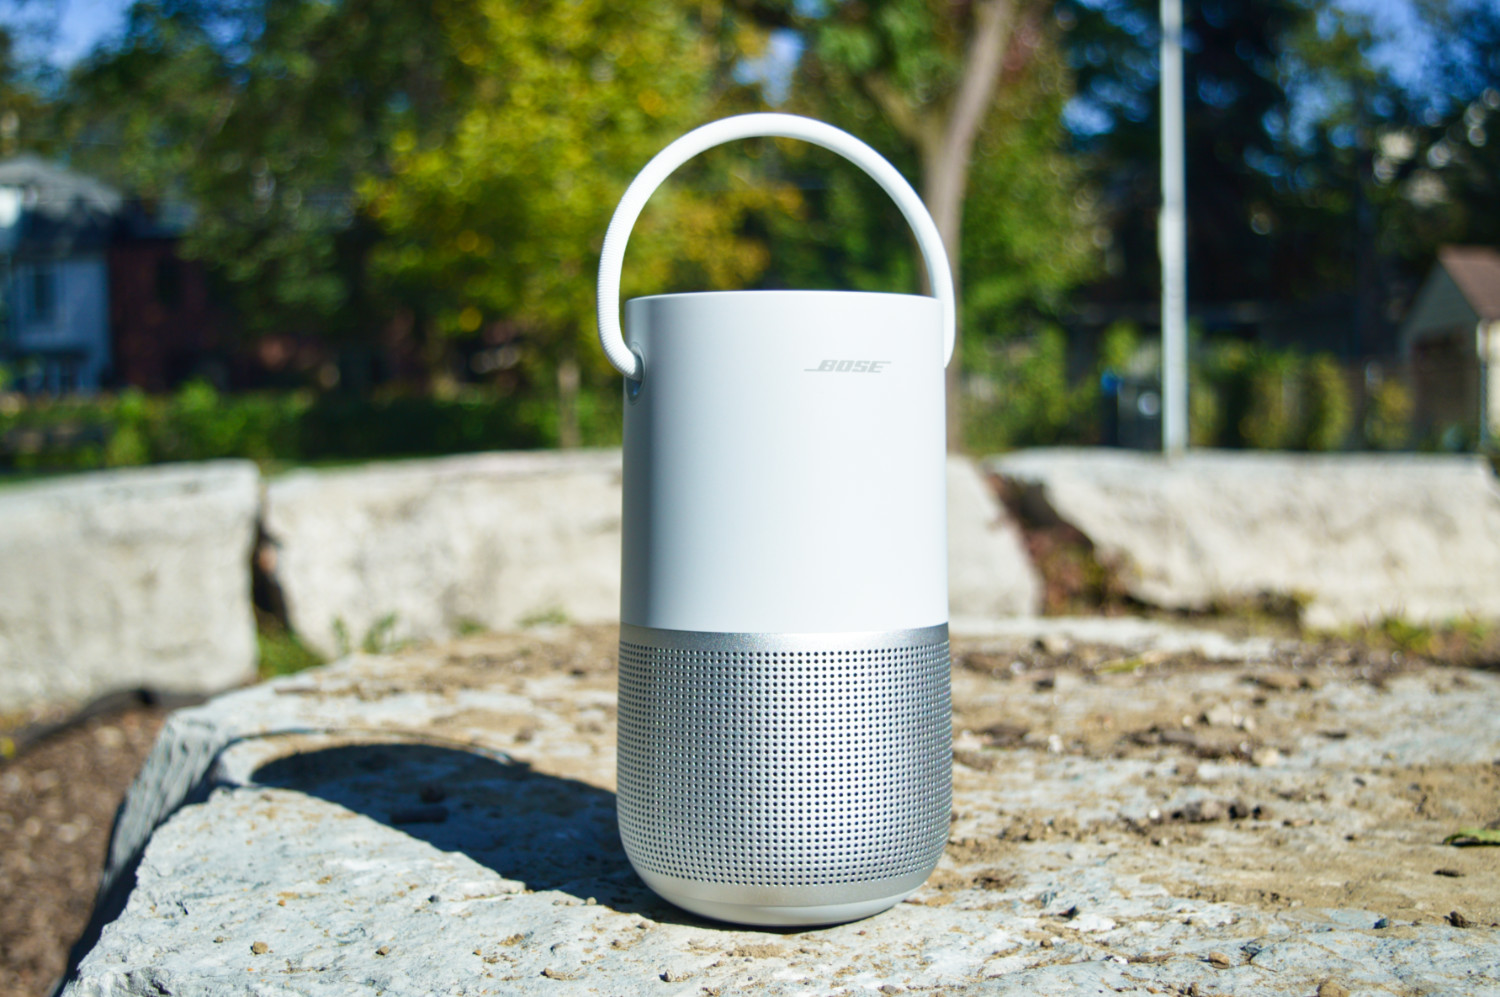 Bose Portable Great That Goes Anywhere | Digital Trends